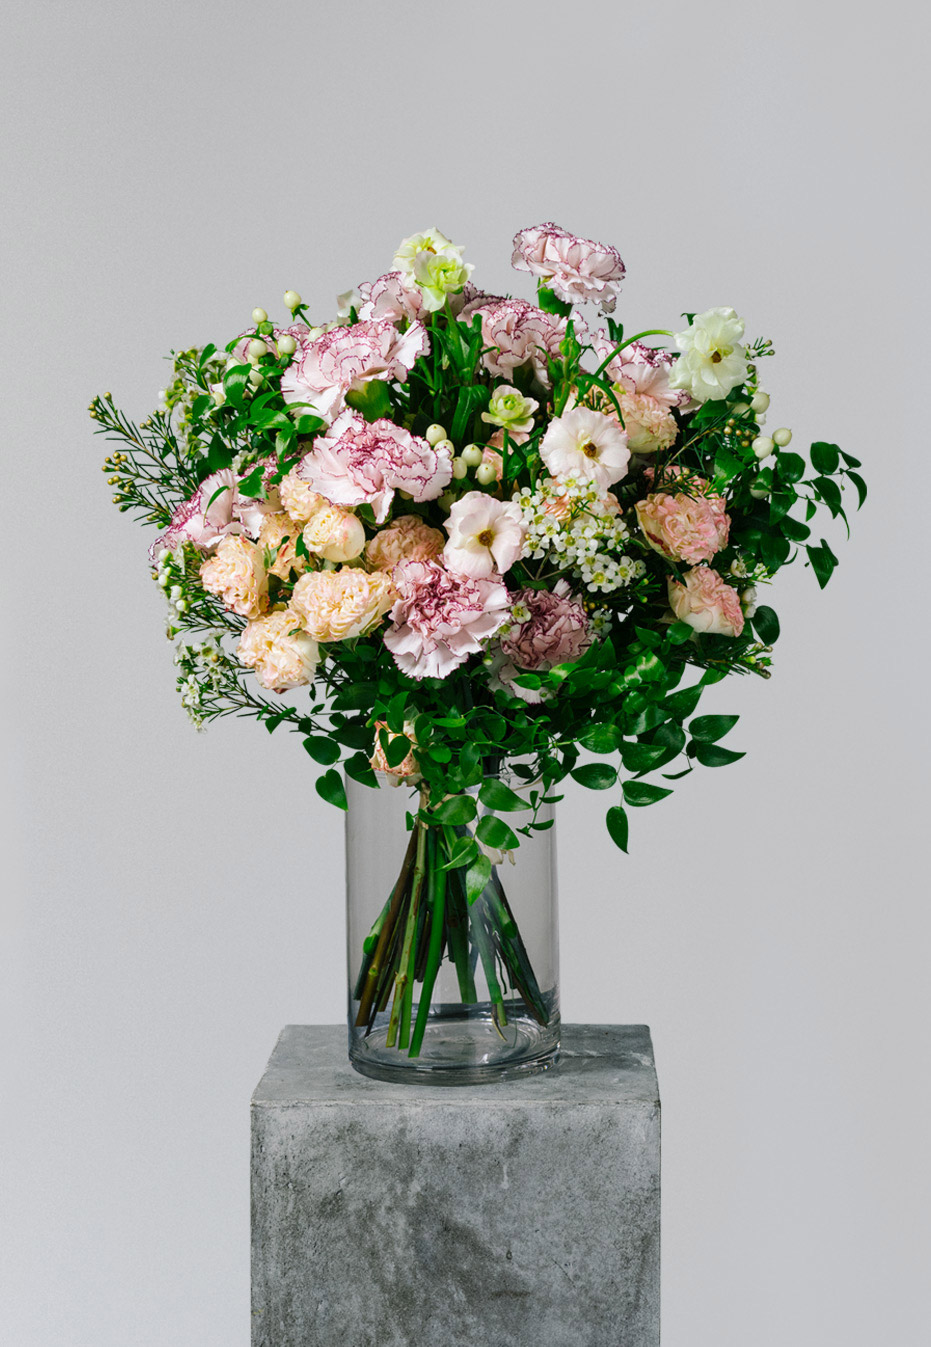 flower bouquet of carnation and ranunculus by flannel flowers